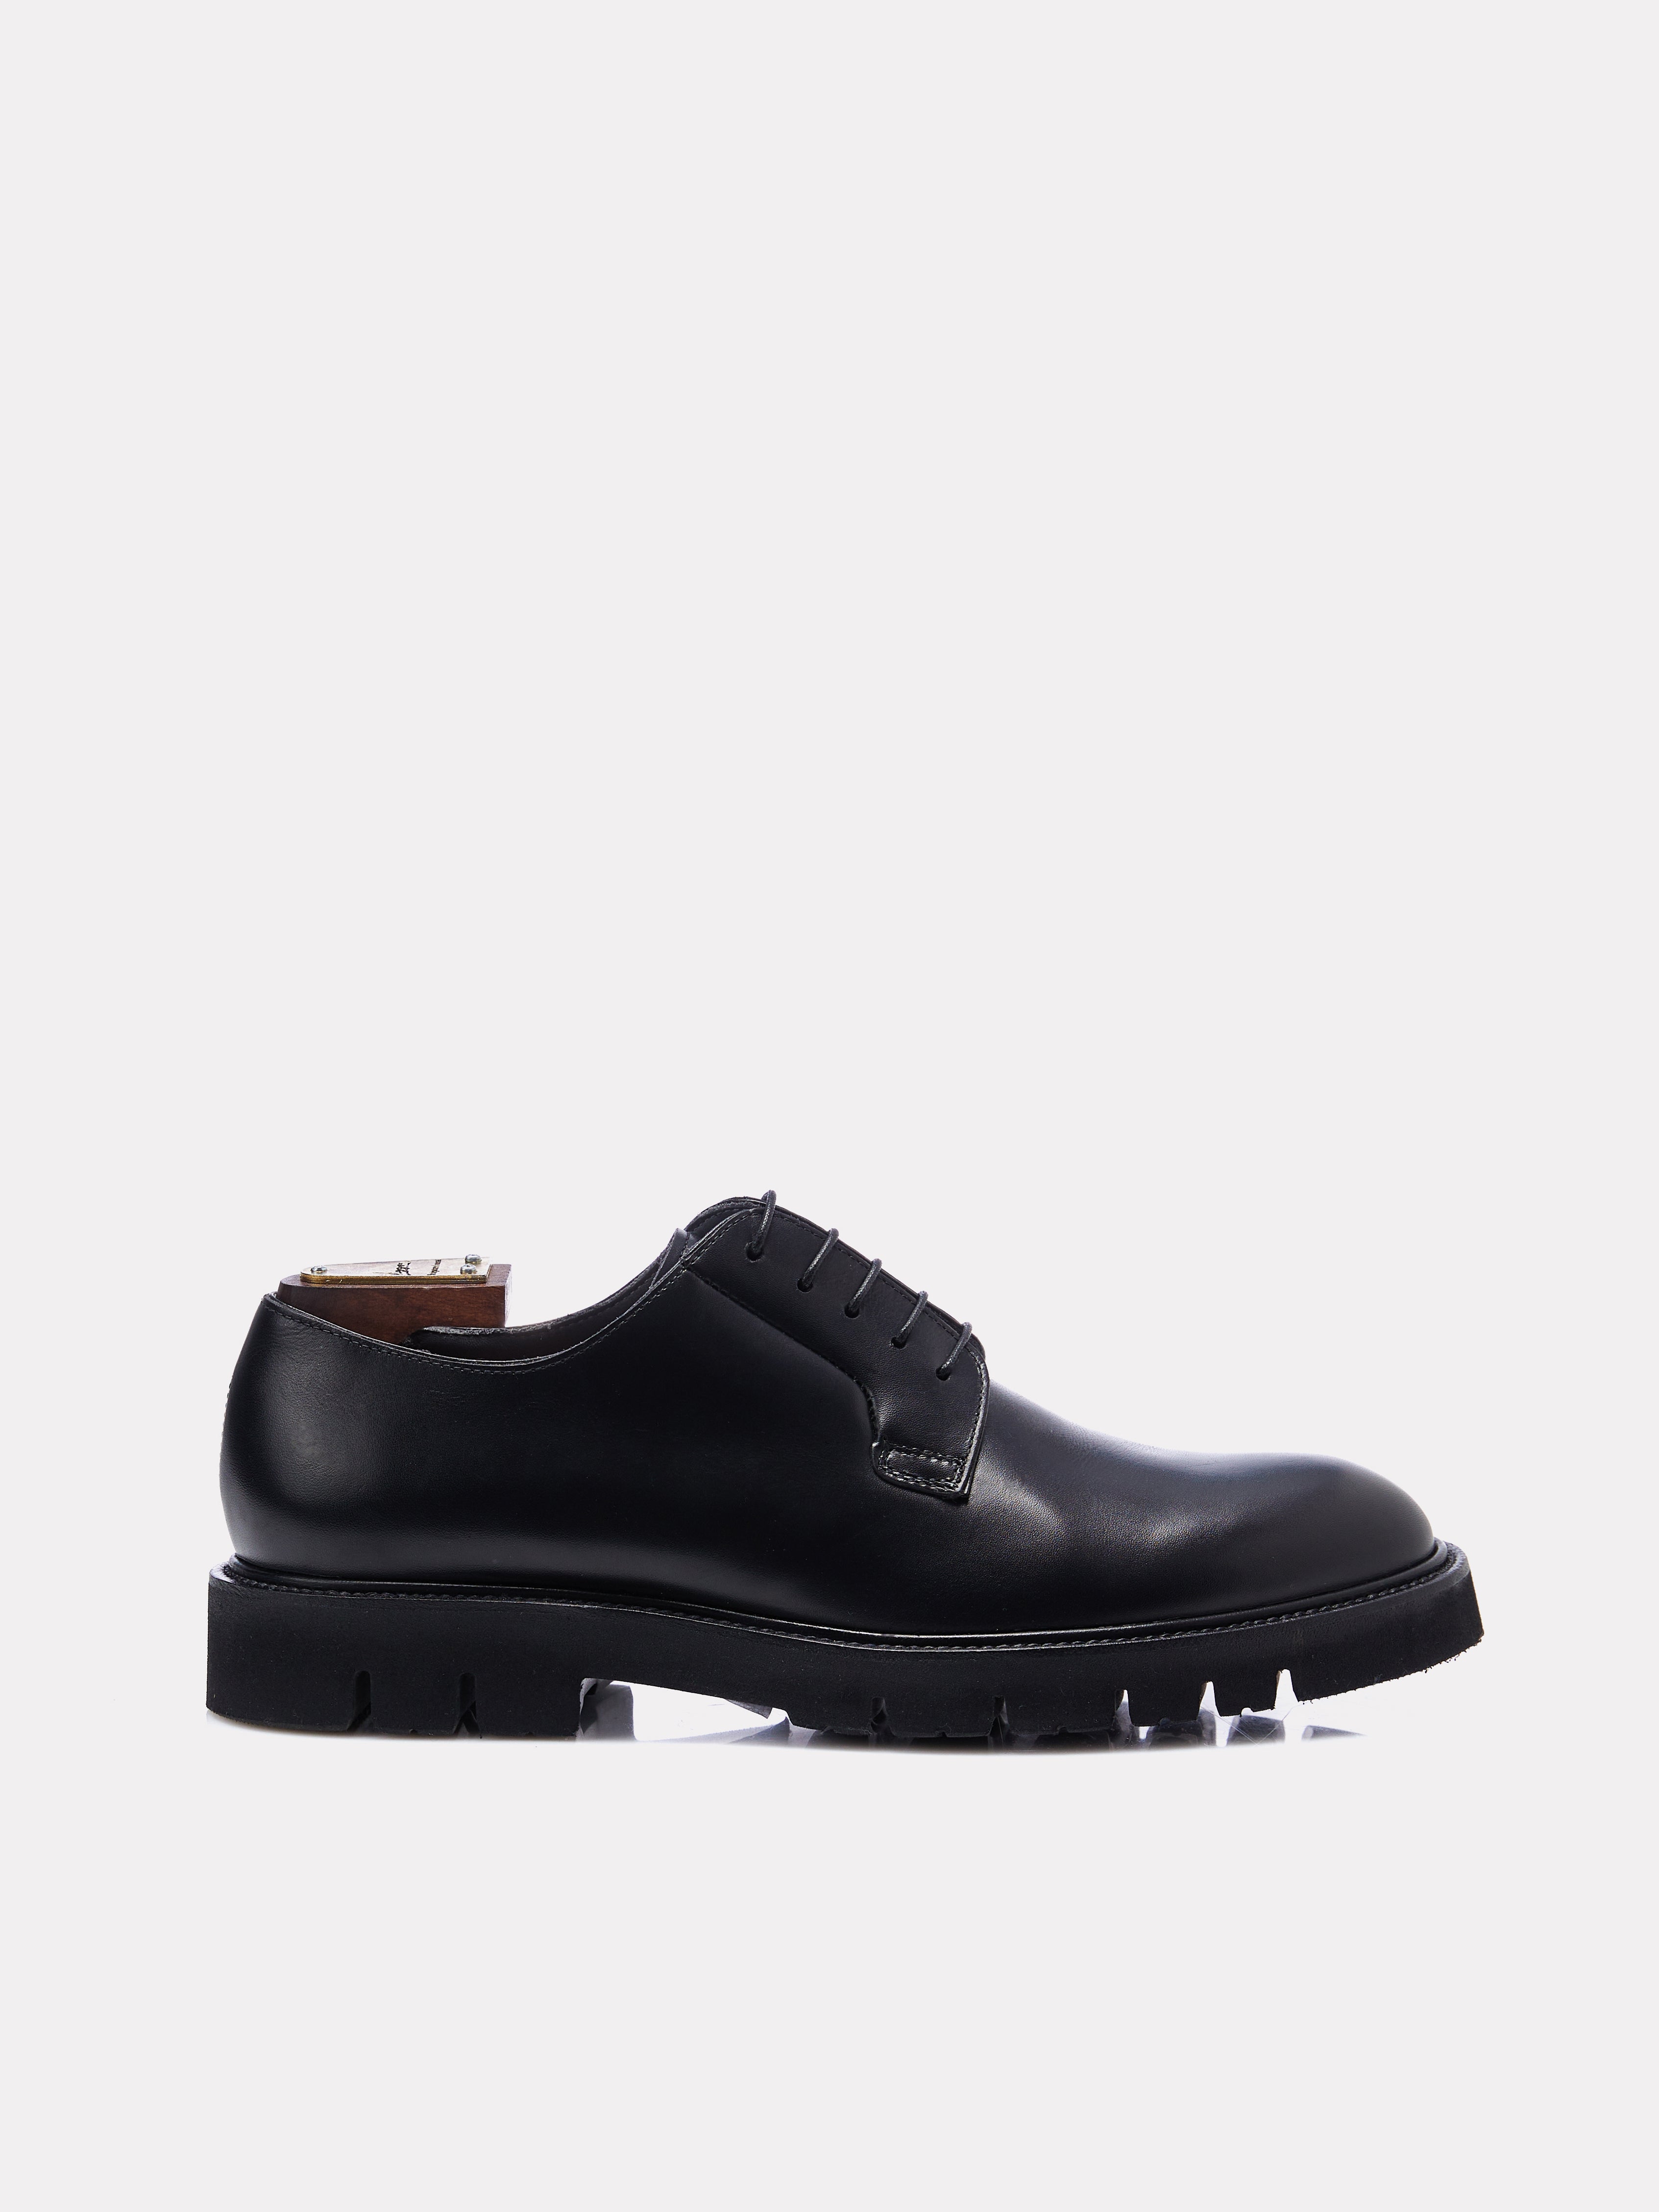 Black derby shoes with chunky sole